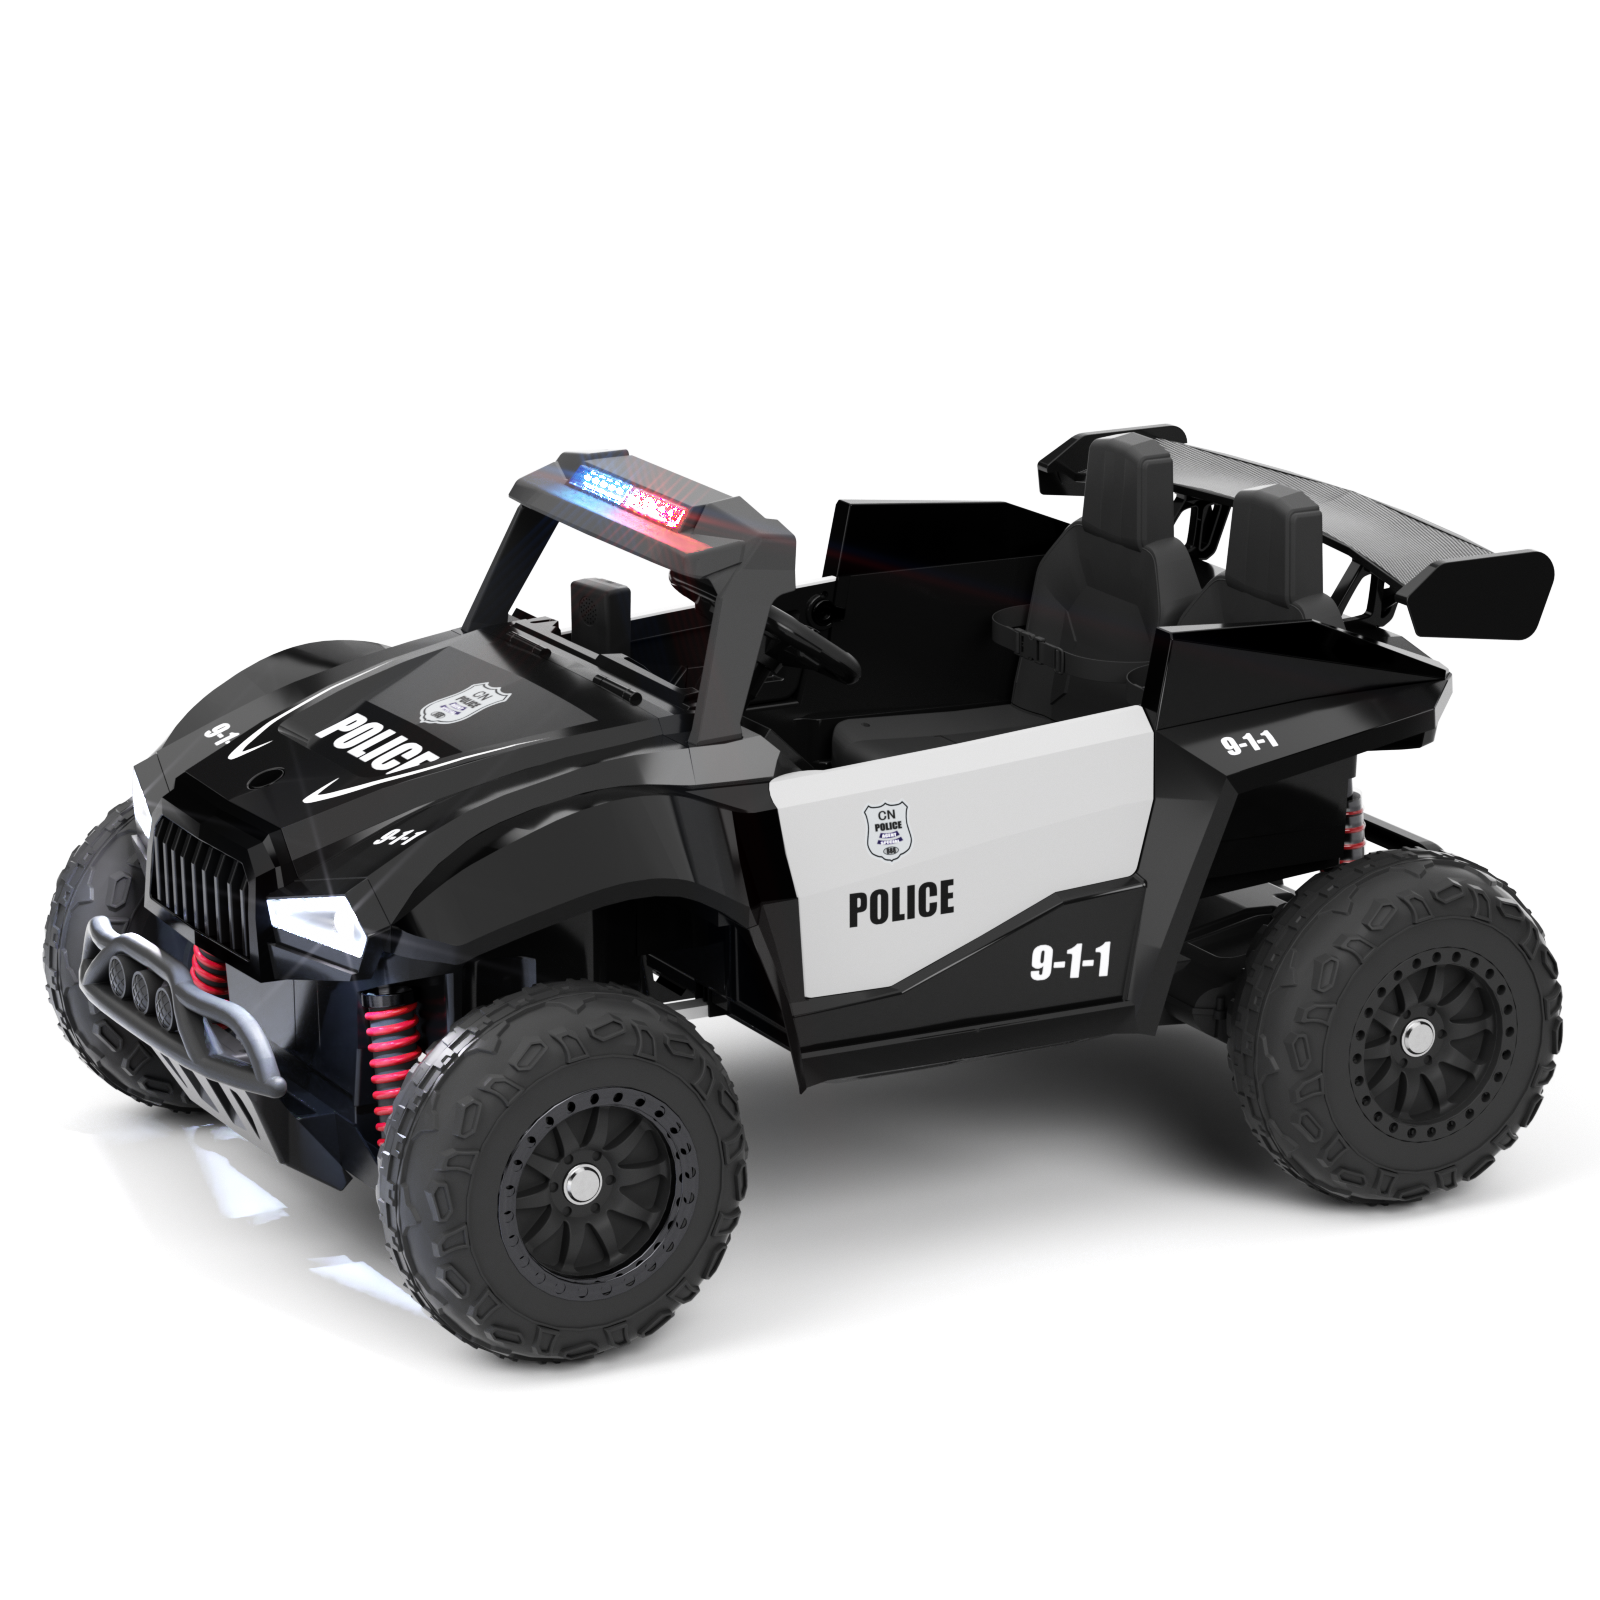 XJD 12V/24V 7AH Ride On Car with Remote Control, 2WD/4WD Switchable, 2 Seats, Power Car for Kids, Black&White